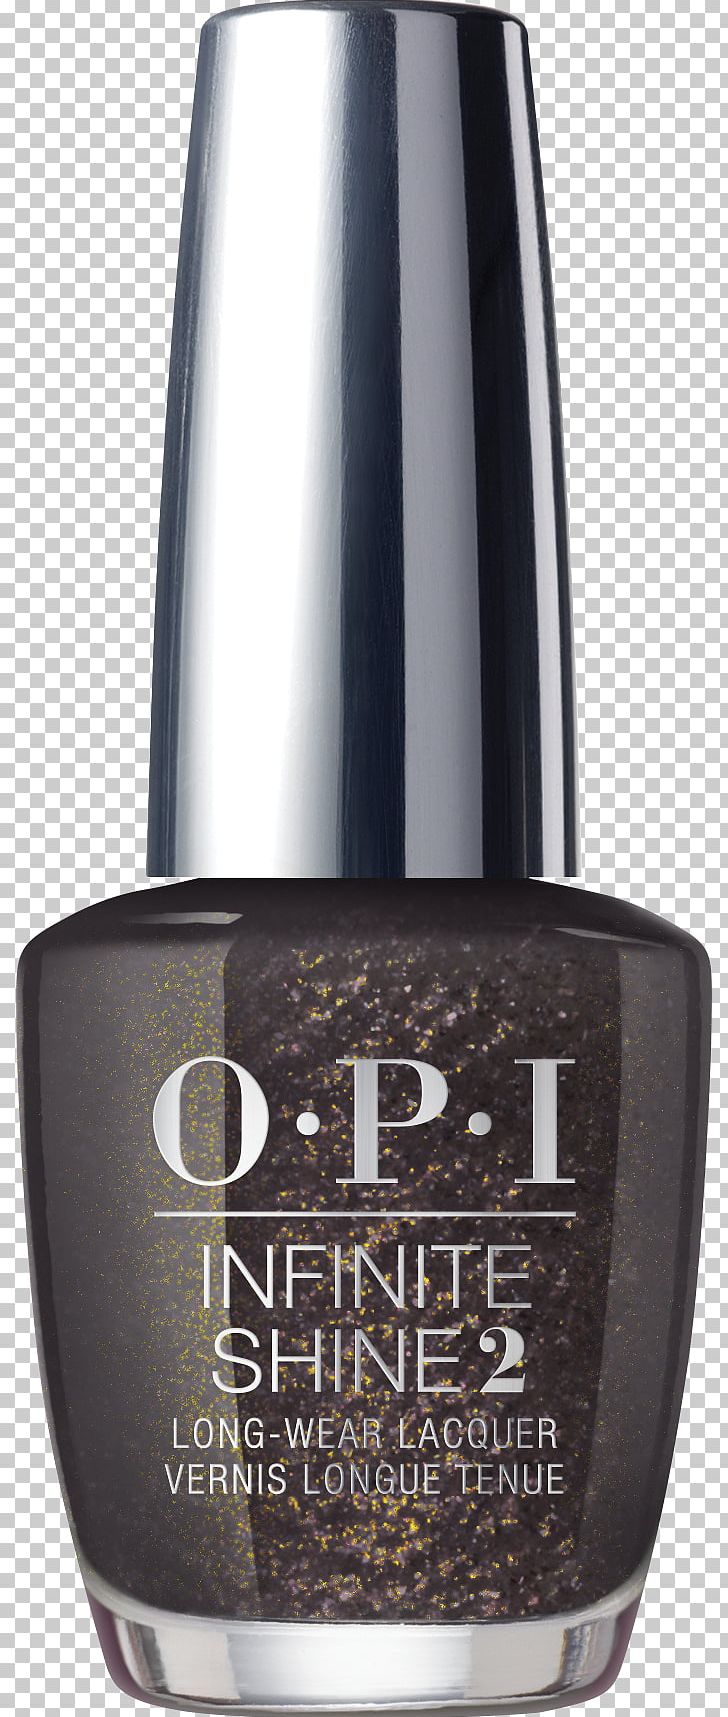 OPI Products OPI Infinite Shine2 OPI Nail Lacquer Nail Polish Manicure PNG, Clipart, Accessories, Beauty Parlour, Color, Cosmetics, Gel Nails Free PNG Download